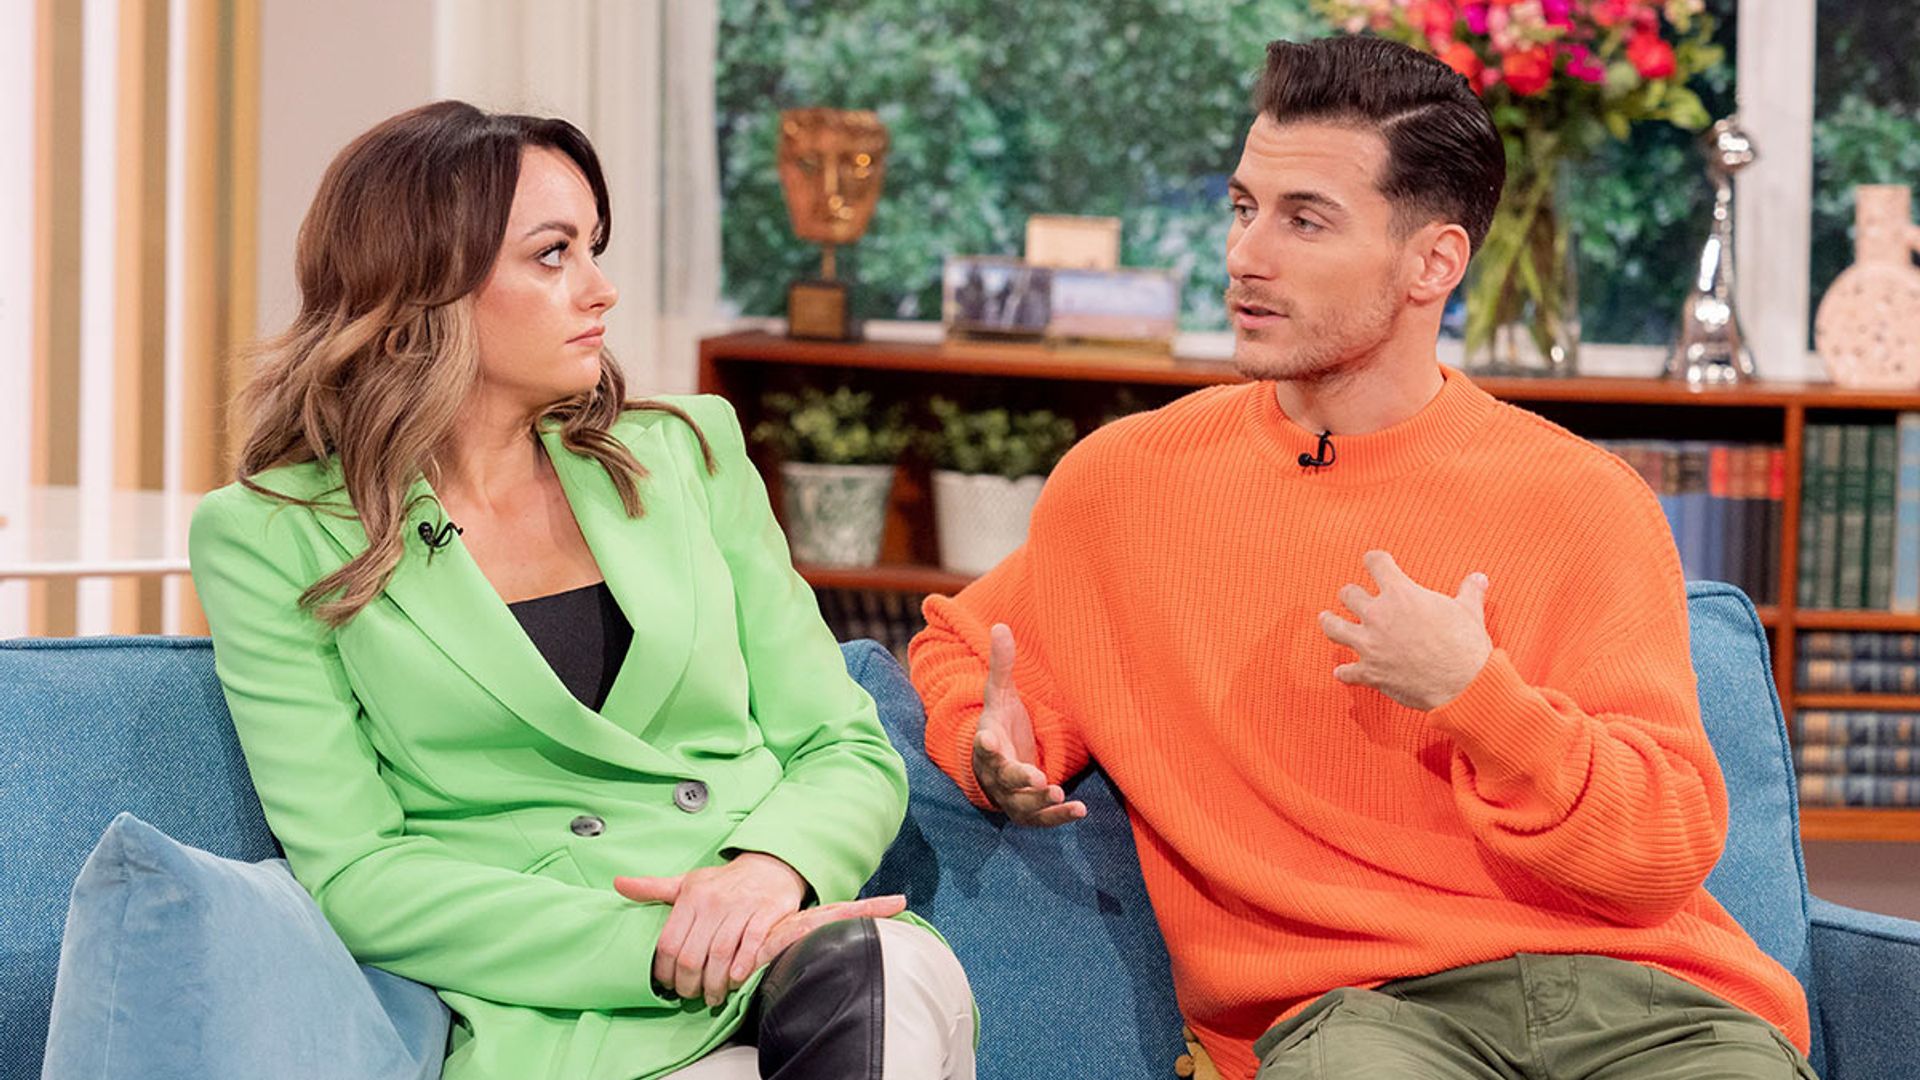 Gorka Marquez breaks silence on Strictly's vaccine situation